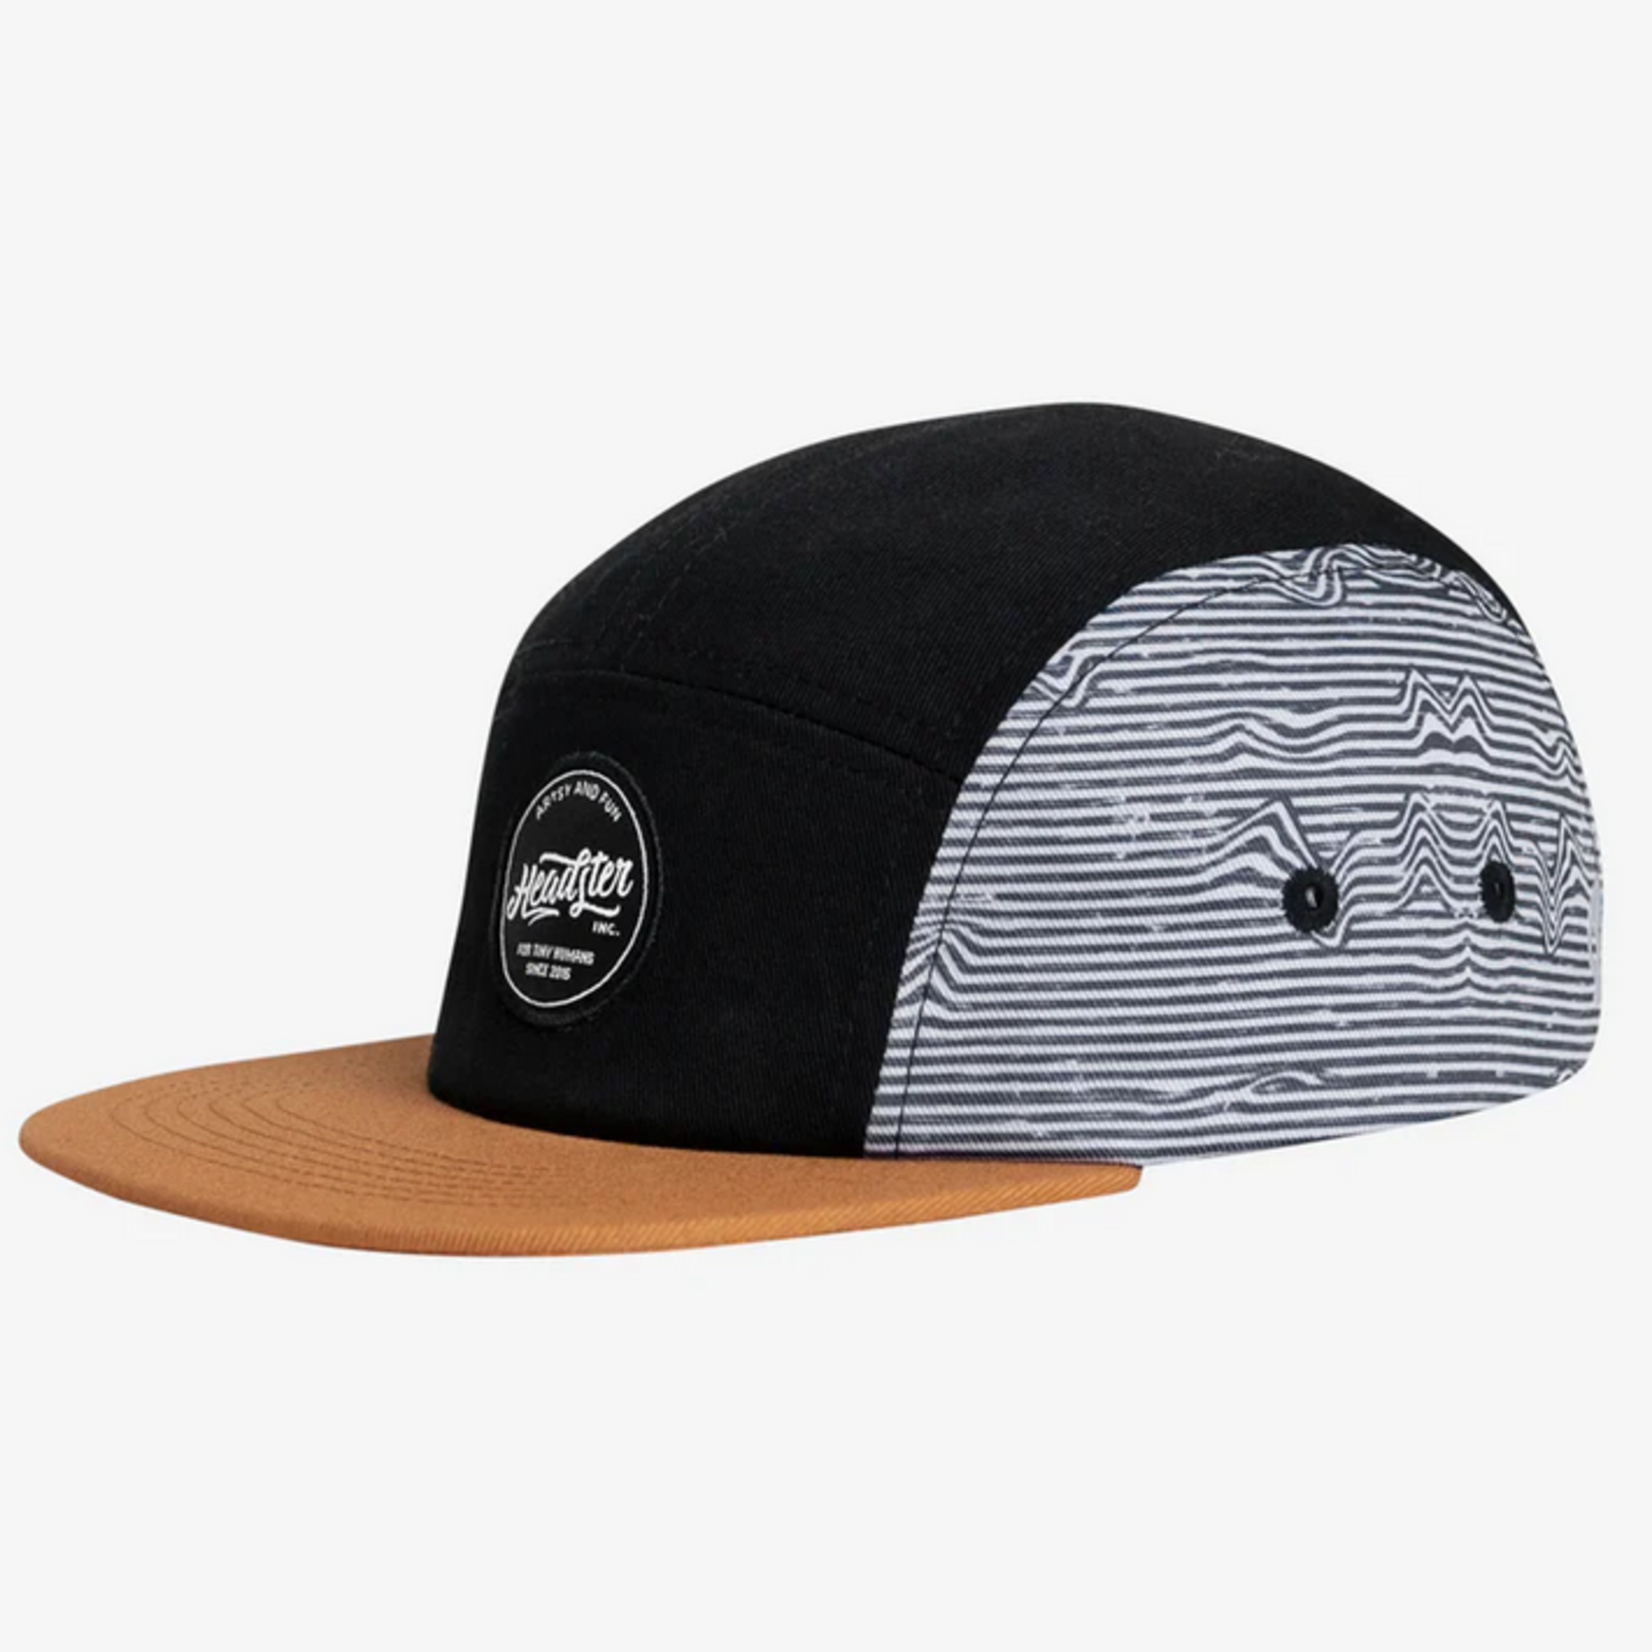 Headster HEADSTER 5 PANEL HATS LINEUP